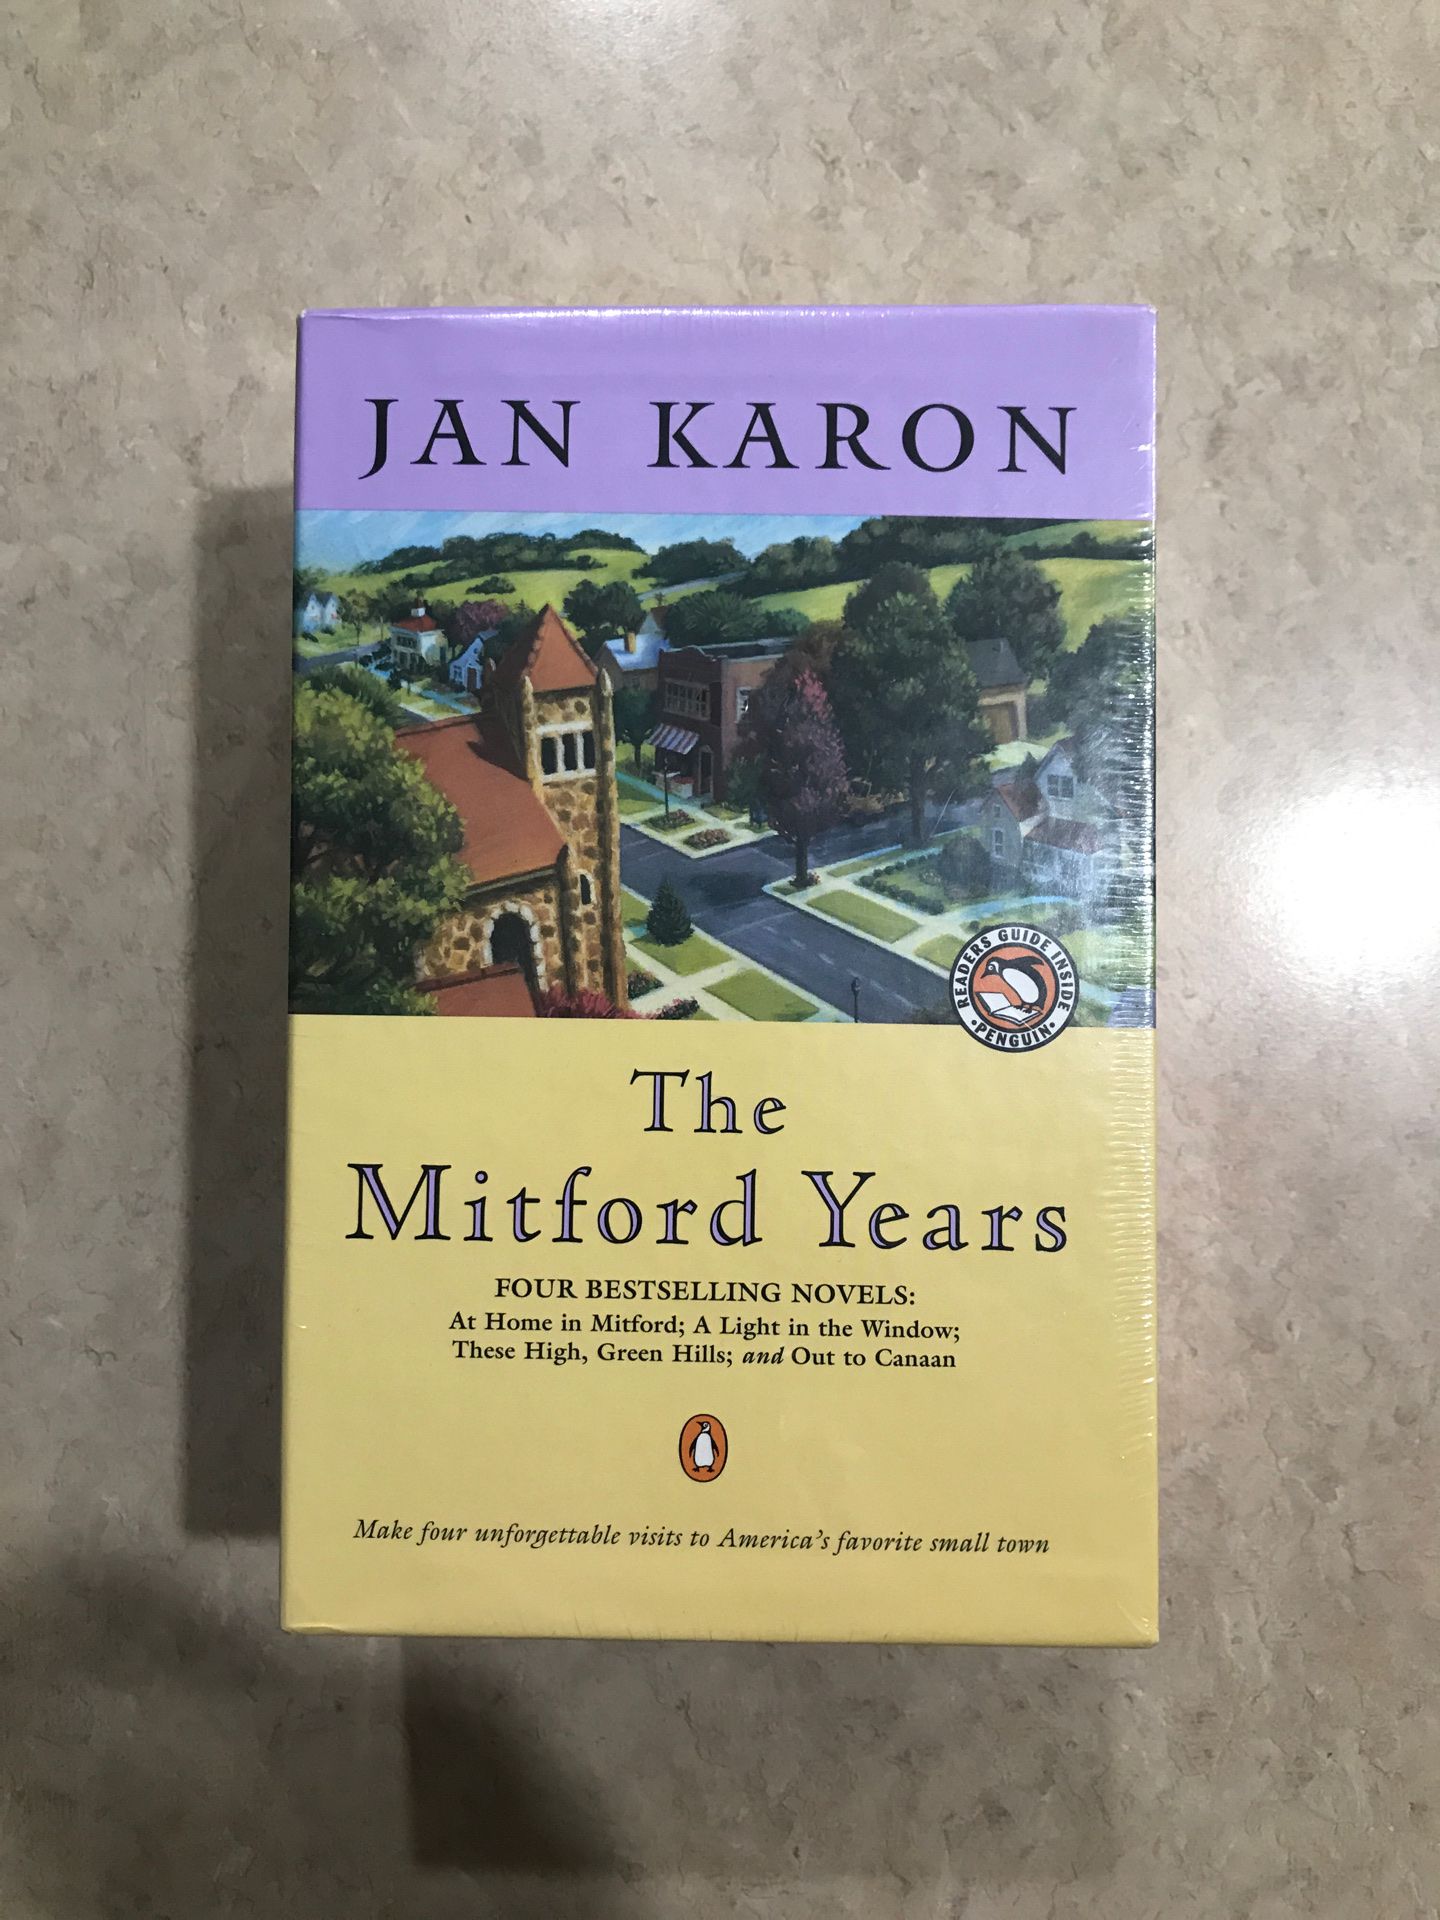 The Mitford Years, 4 Bestselling Novels. New